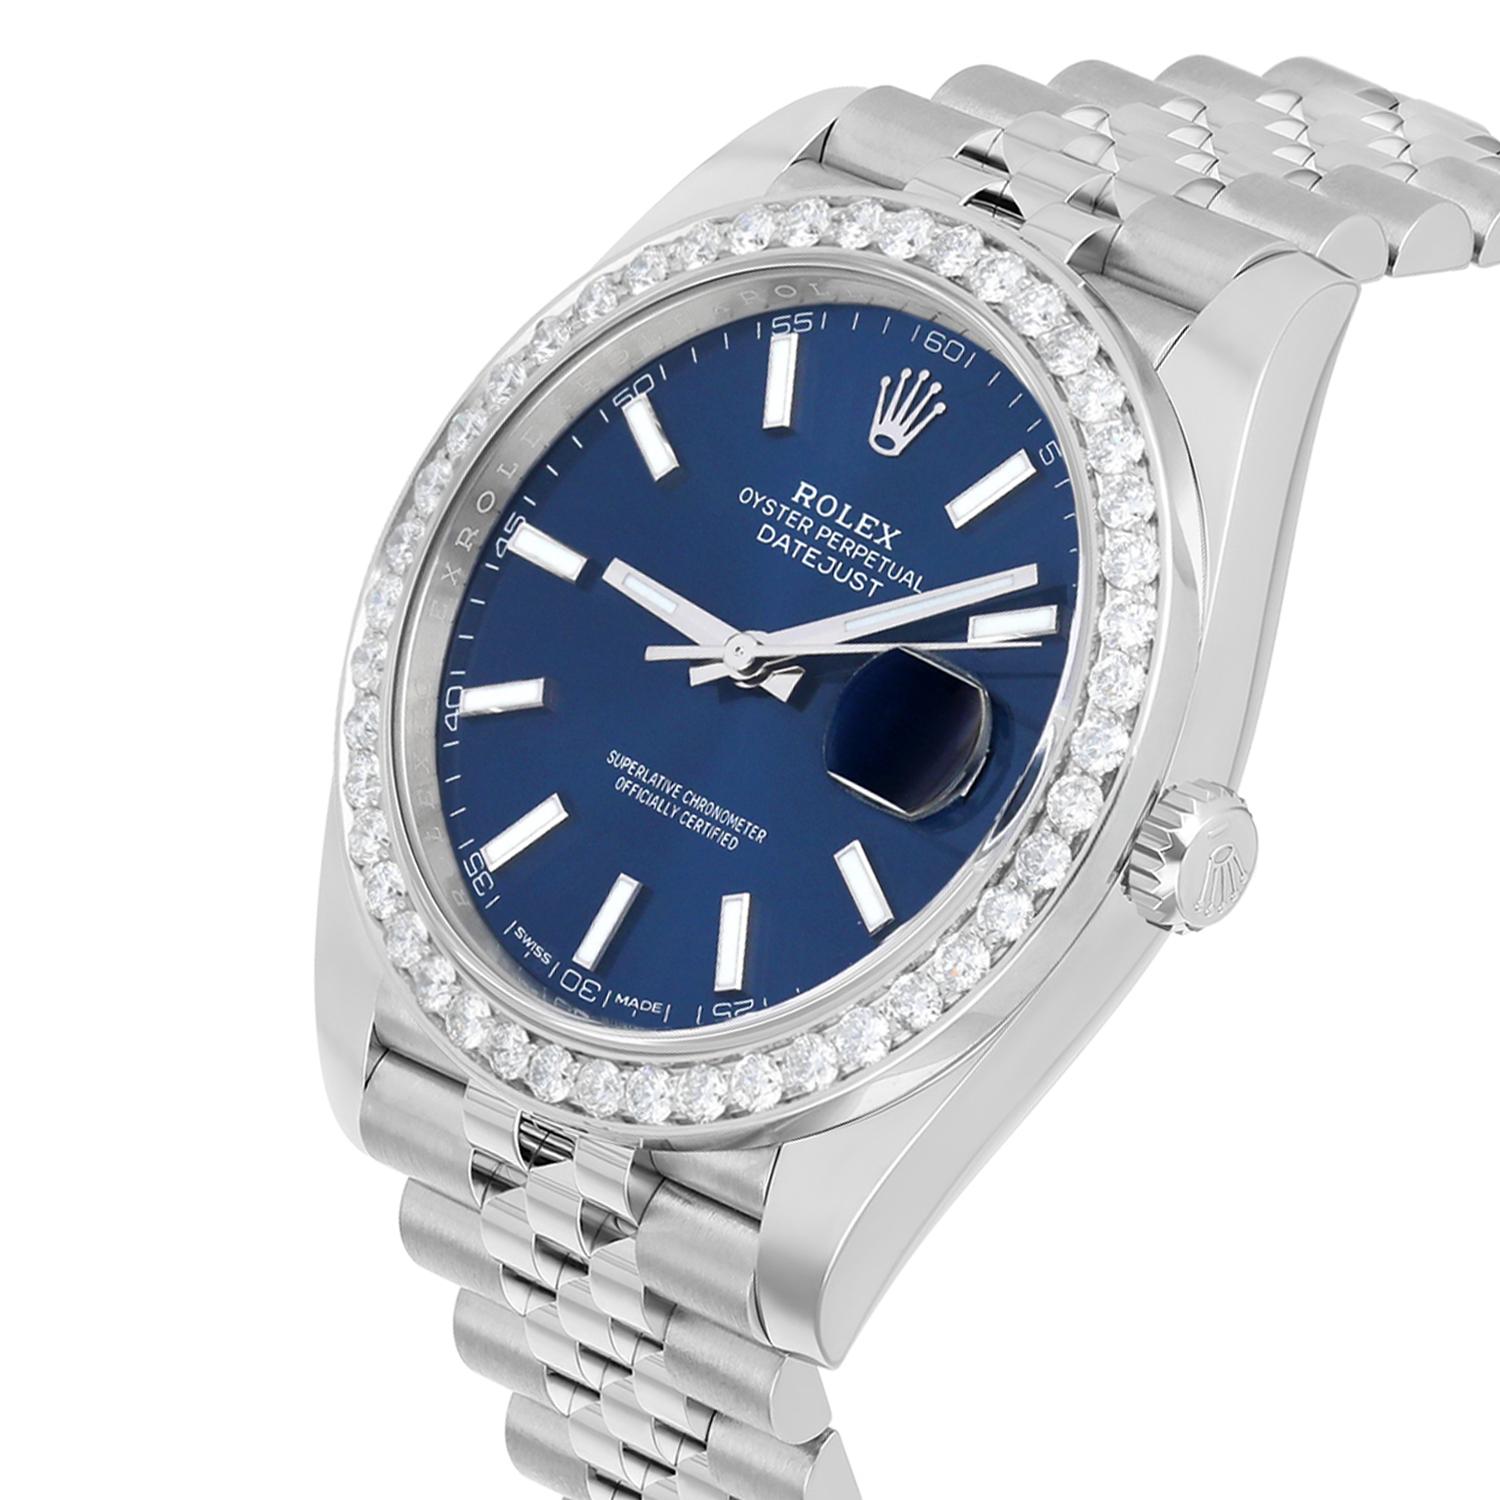 Modern Rolex Datejust 41 Steel Watch Blue Index Dial Diamonds Mens Jubilee Band 126300 For Sale